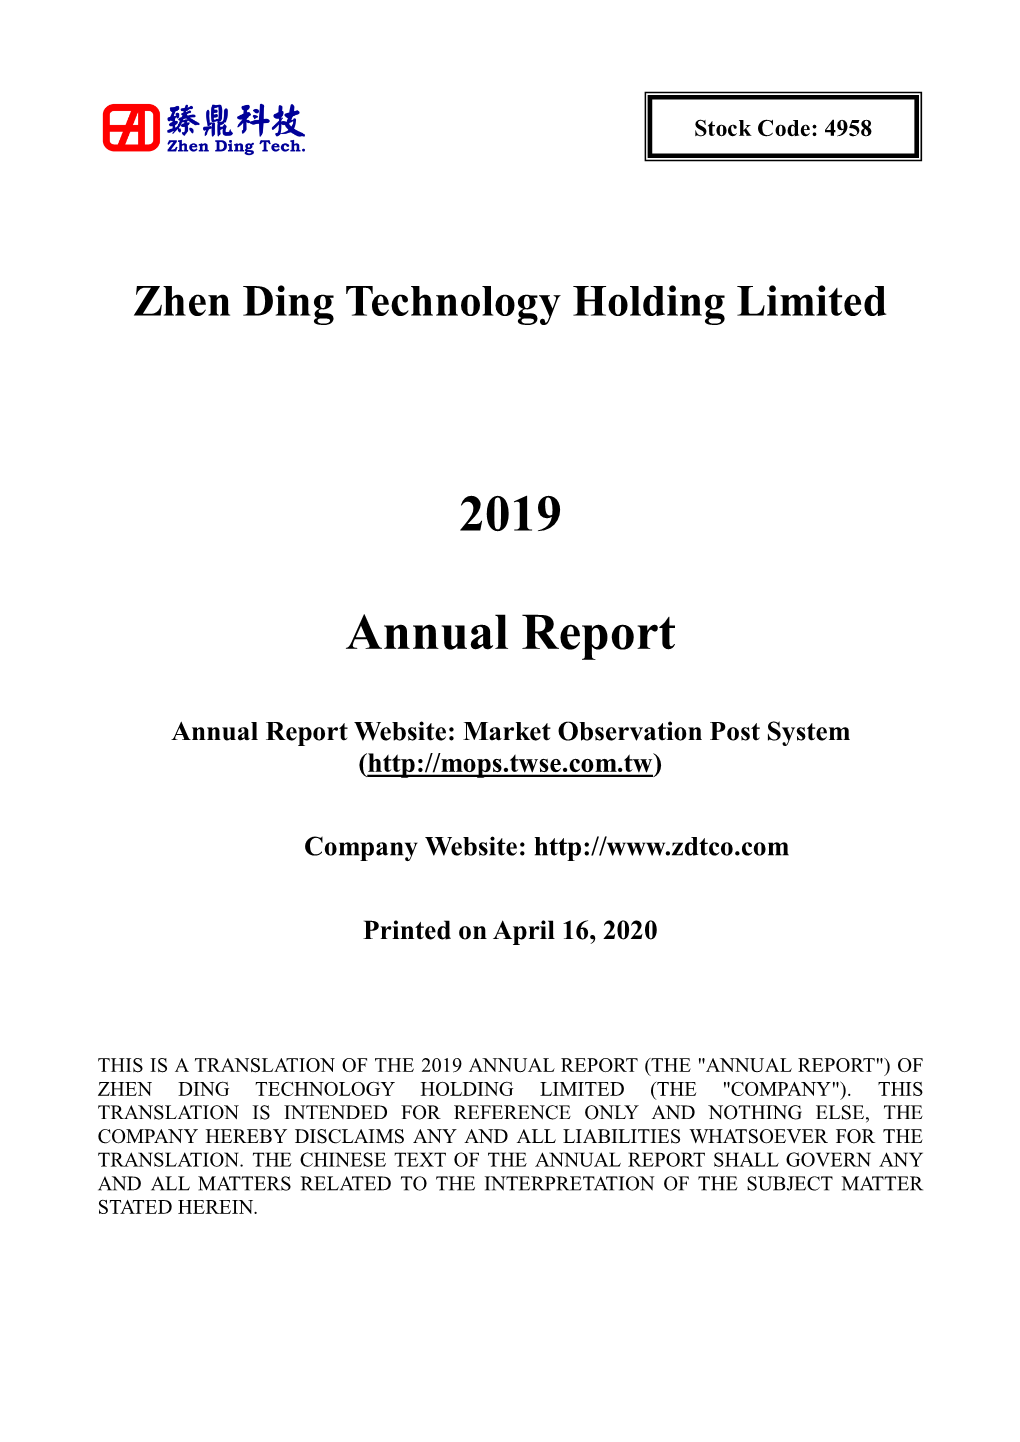 2019 Annual Report (The "Annual Report") of Zhen Ding Technology Holding Limited (The "Company")